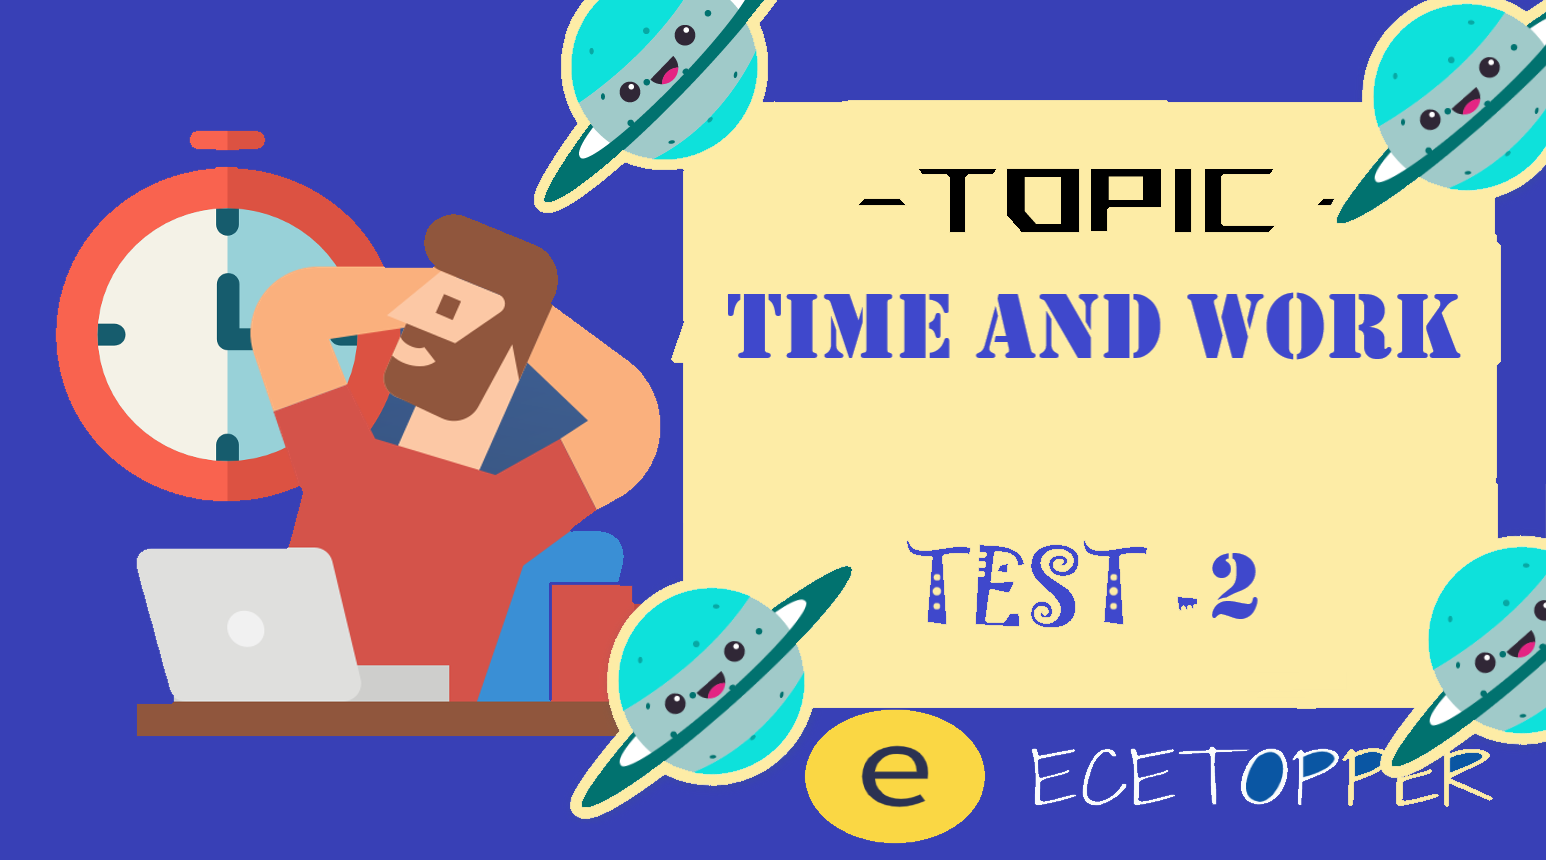 Aptitude Test On Time And Work